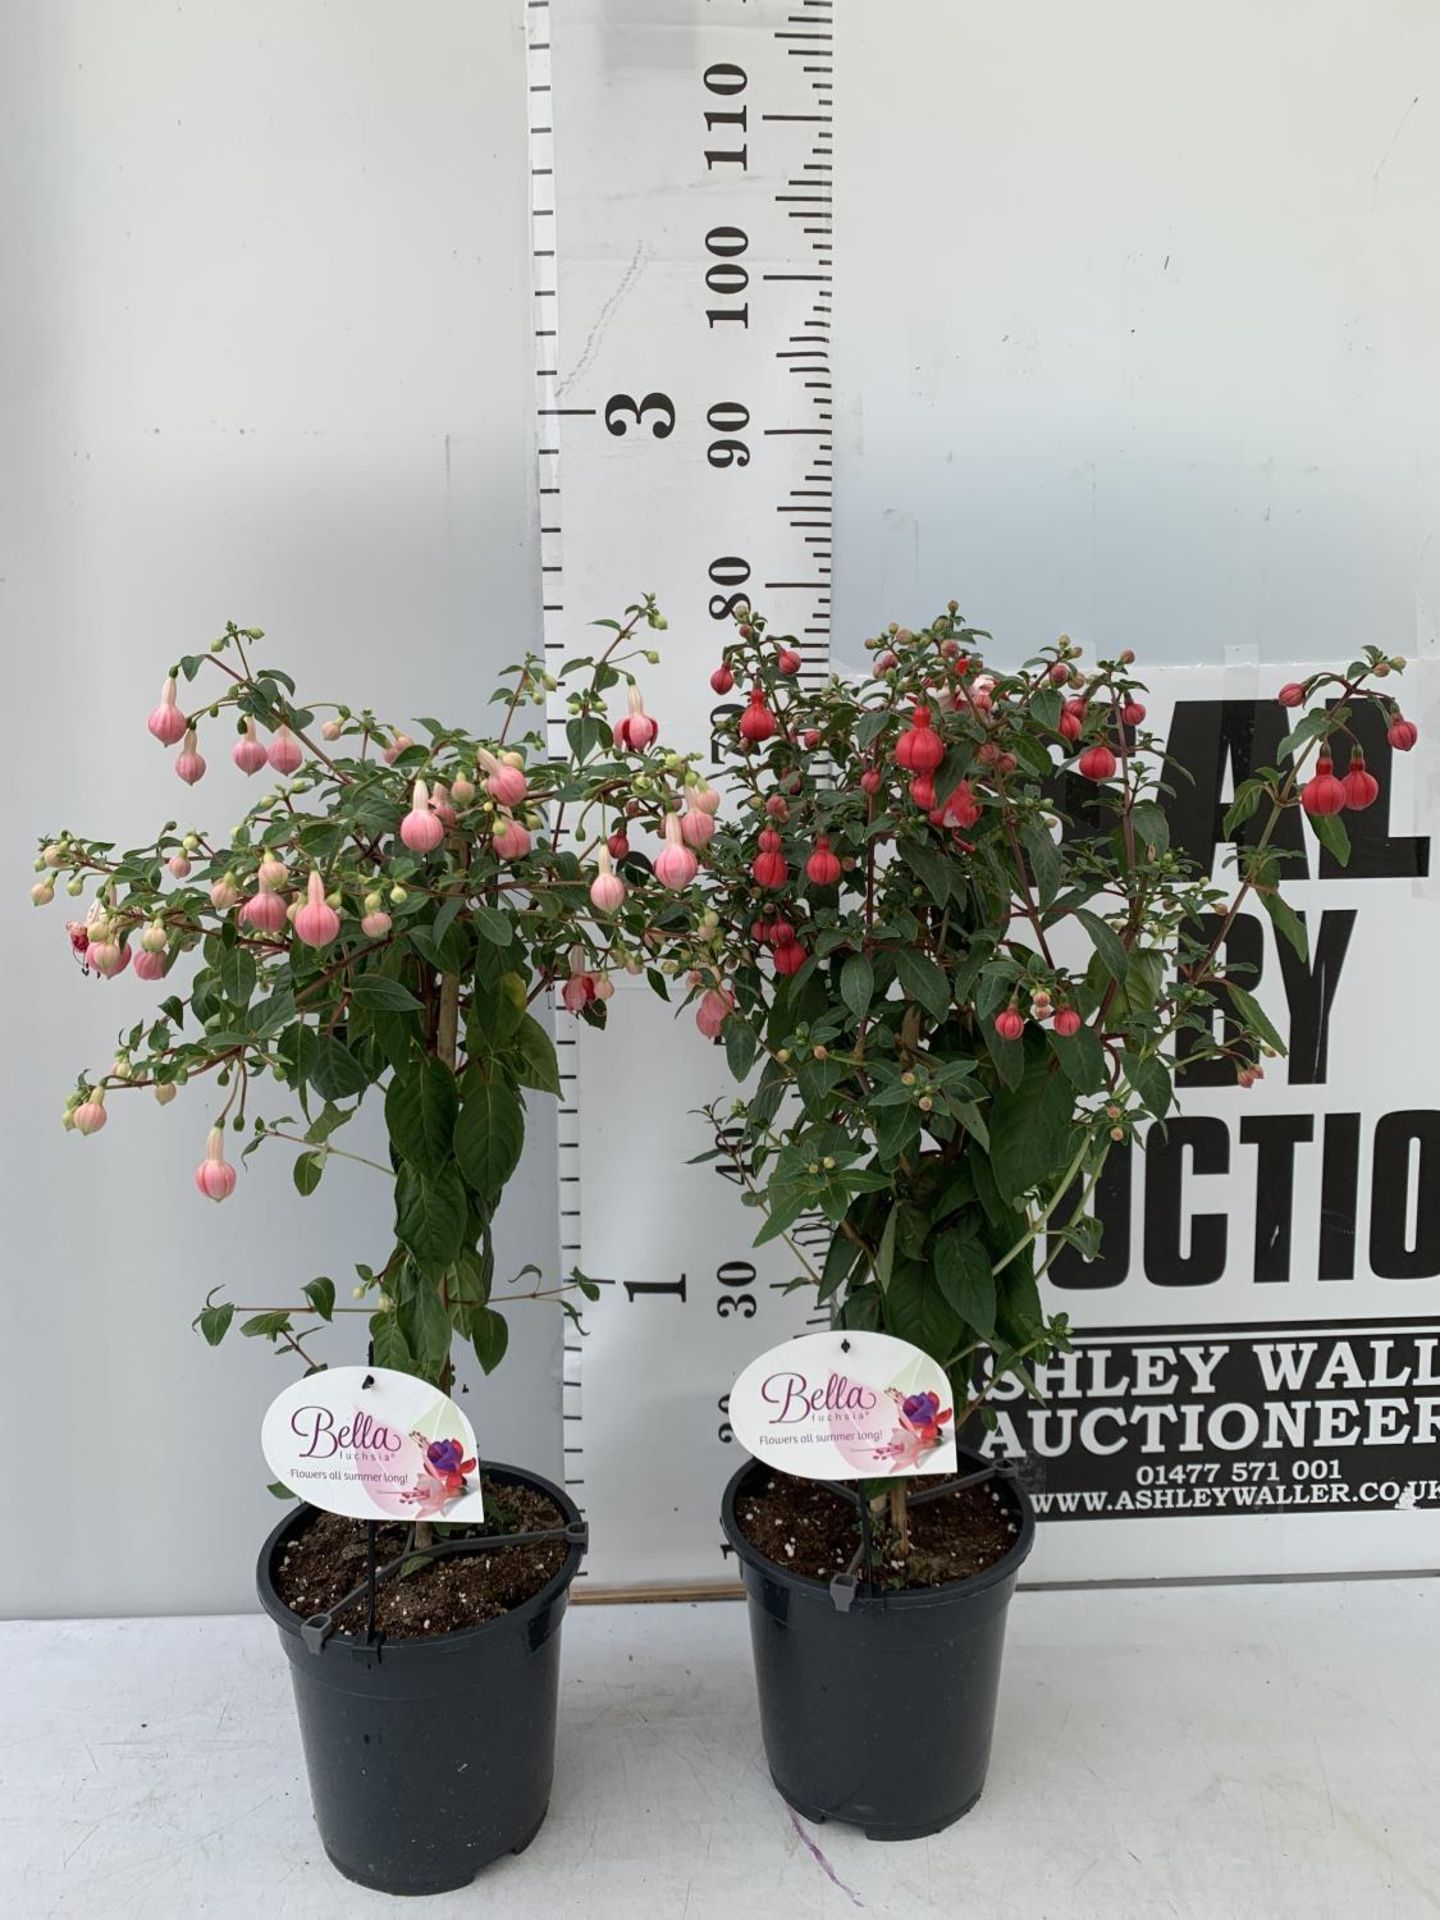 TWO BELLA STANDARD FUCHSIA IN A 3 LTR POTS 70CM -80CM TALL TO BE SOLD FOR THE TWO PLUS VAT - Image 2 of 8